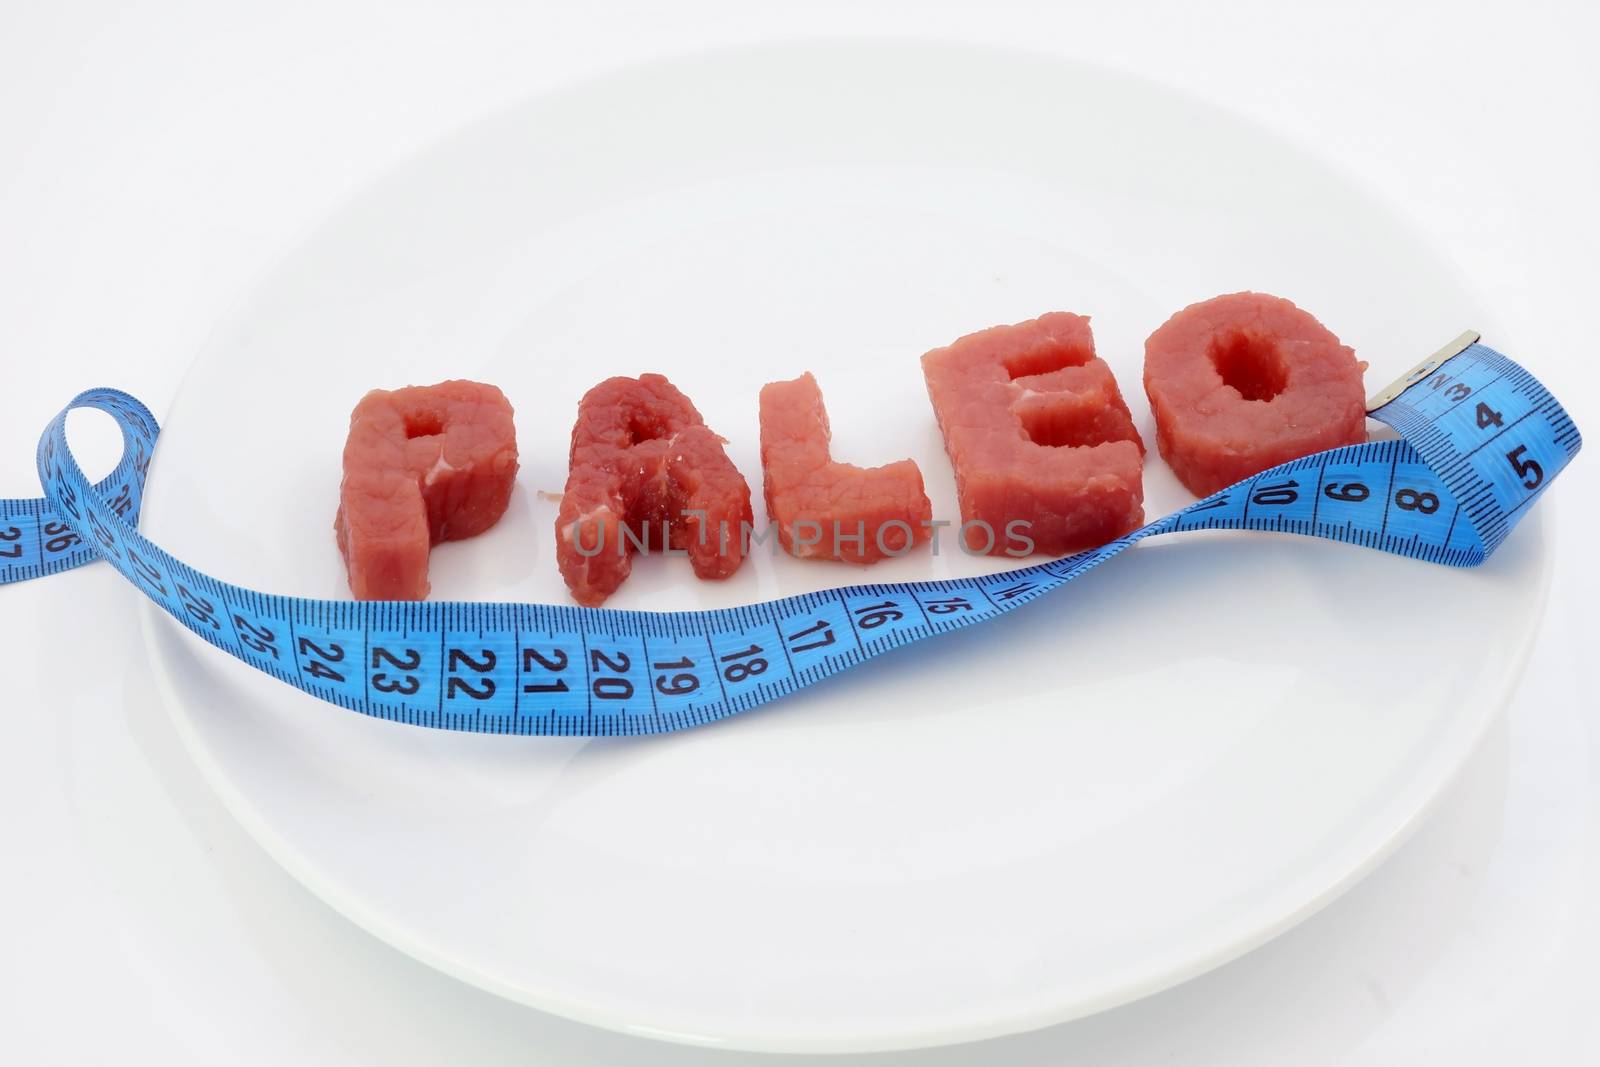 paleo diet and weight loss by designer491